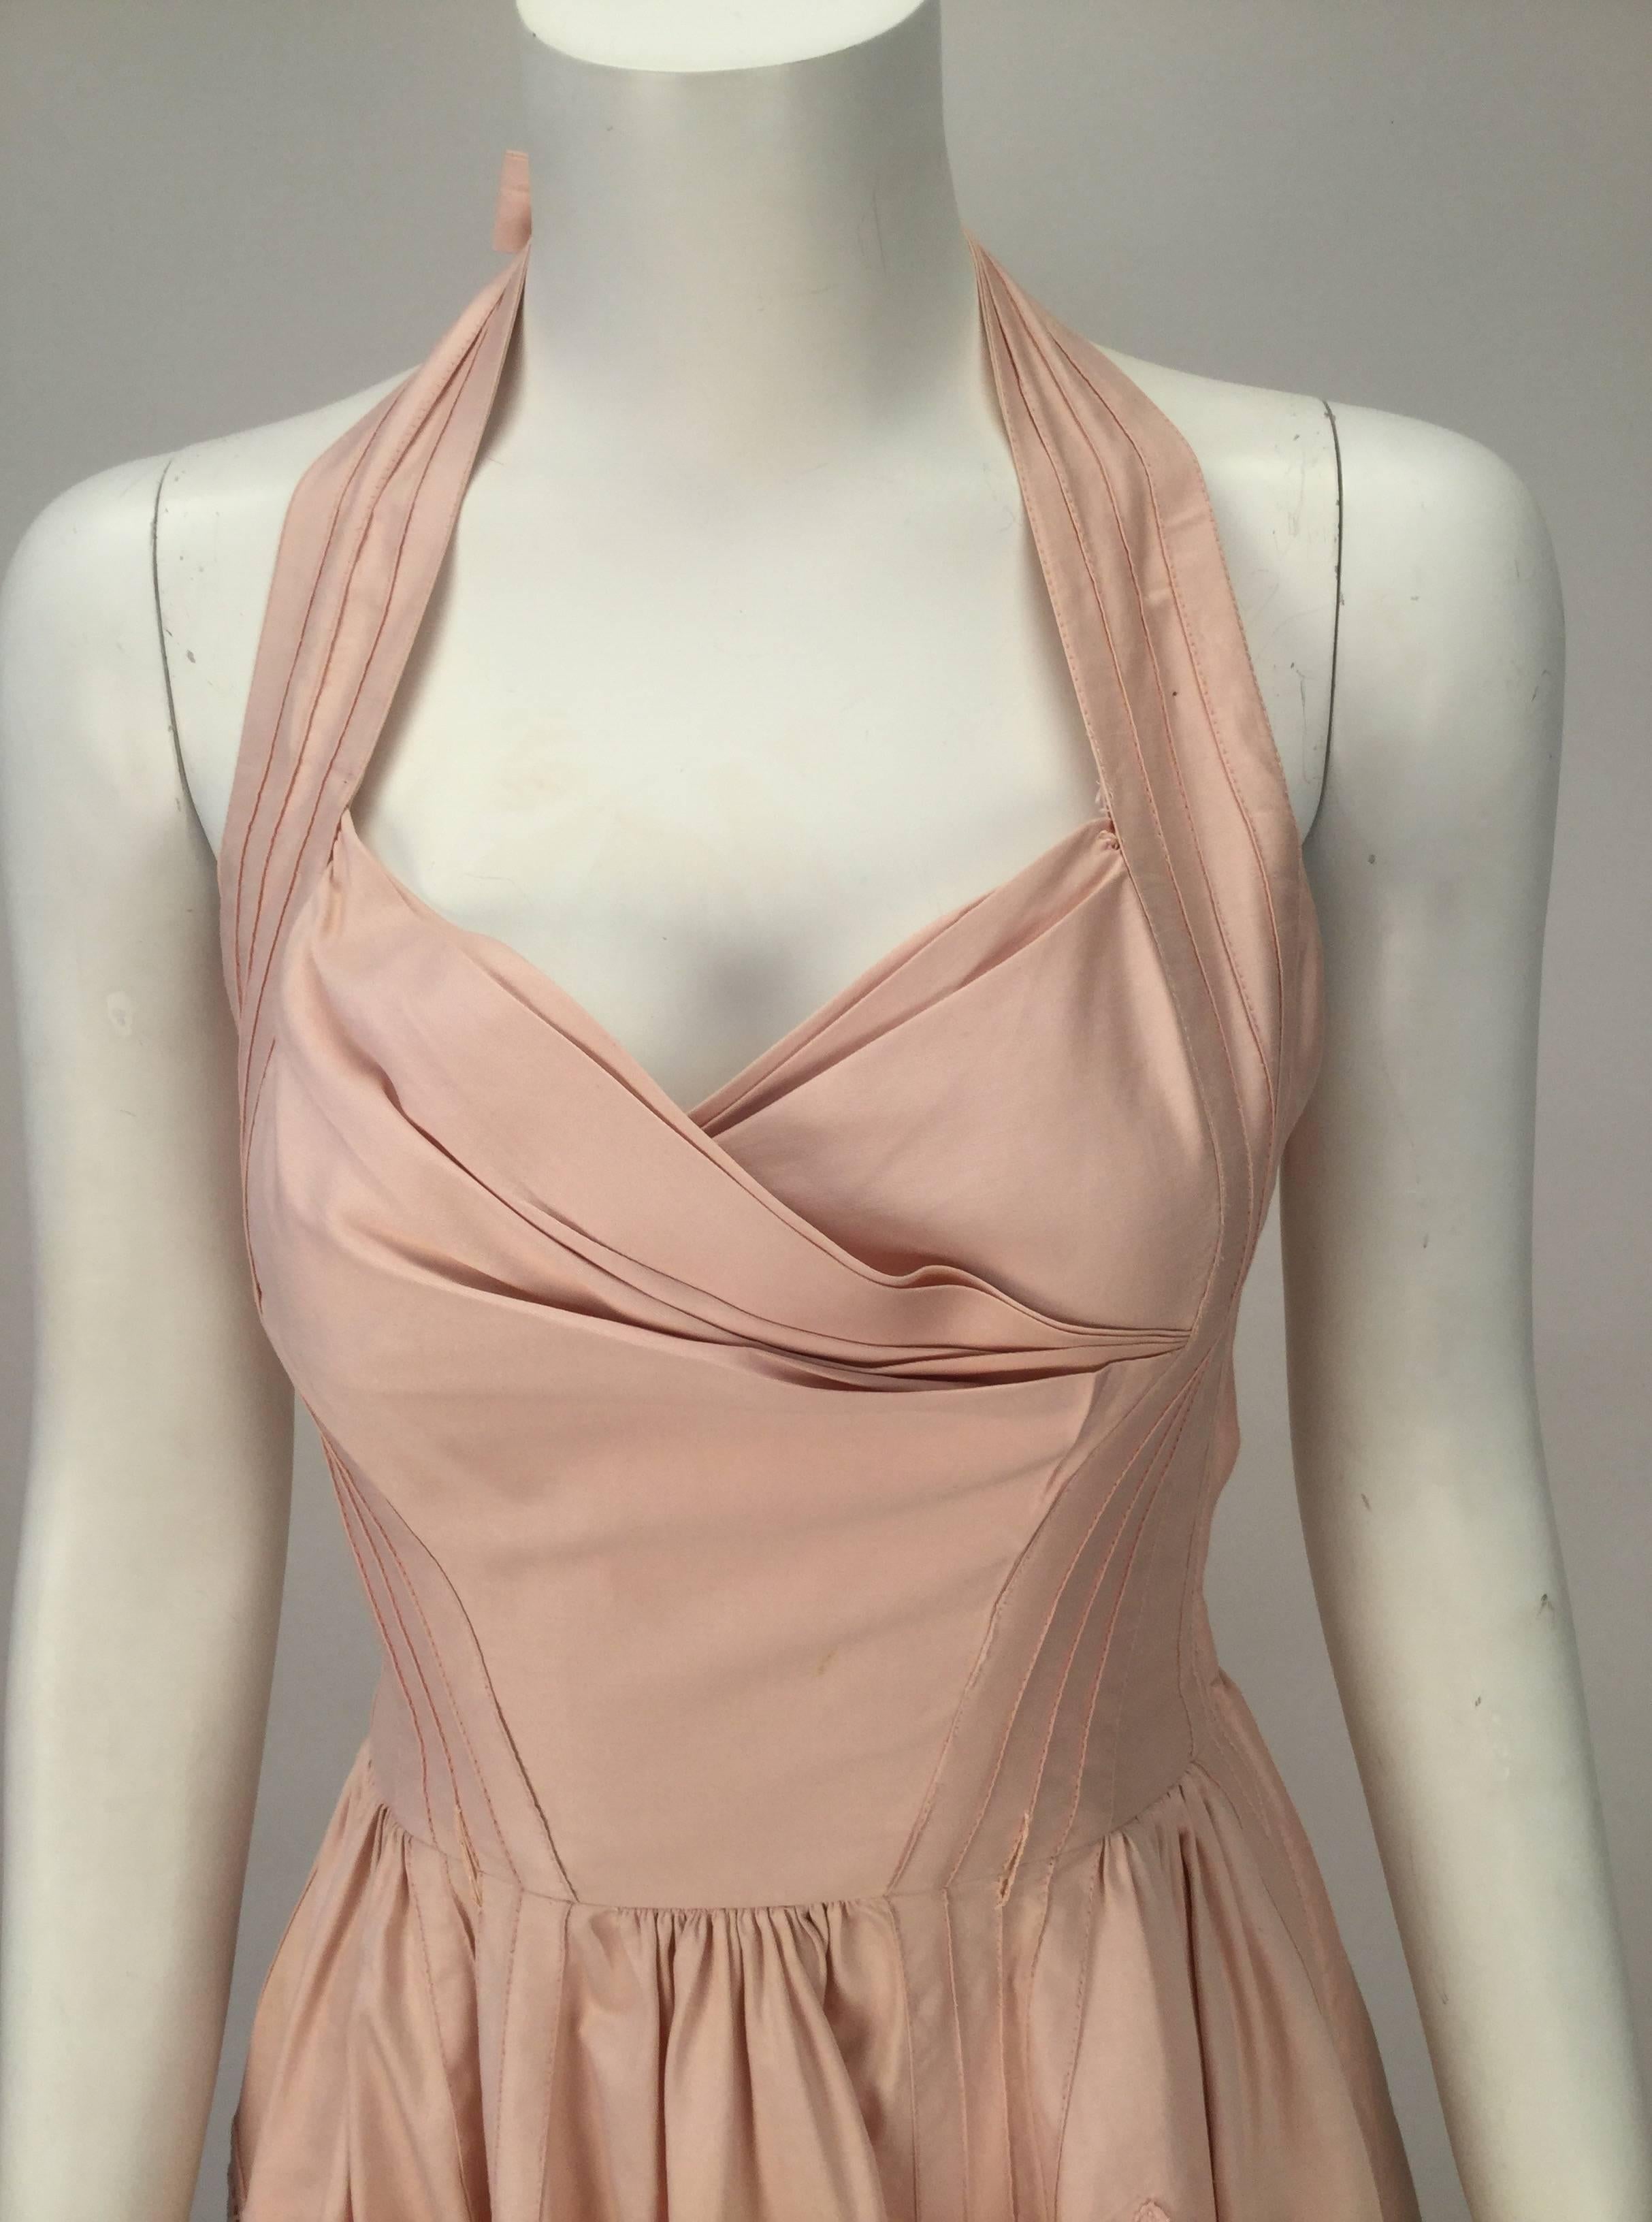 Summer beach movies and 50's cotillion teas are what come to mind when we think of this pale pink dress. Dress ties around the neck creating a halter top. Sweetheart neckline. Gathered at bust line. Gathers also at the waistline adding softness to